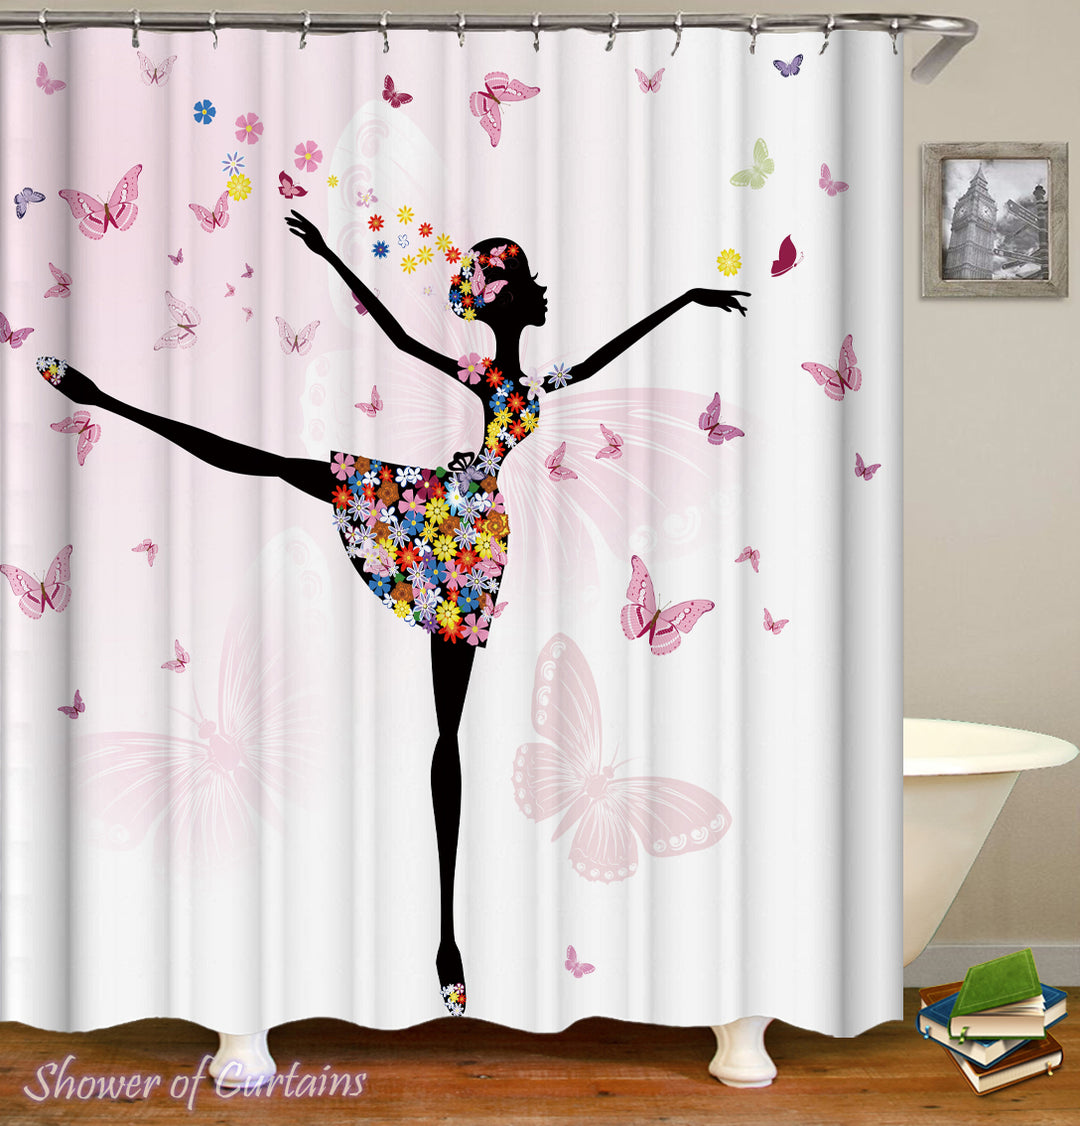 Dancing With The Butterflies Shower Curtains